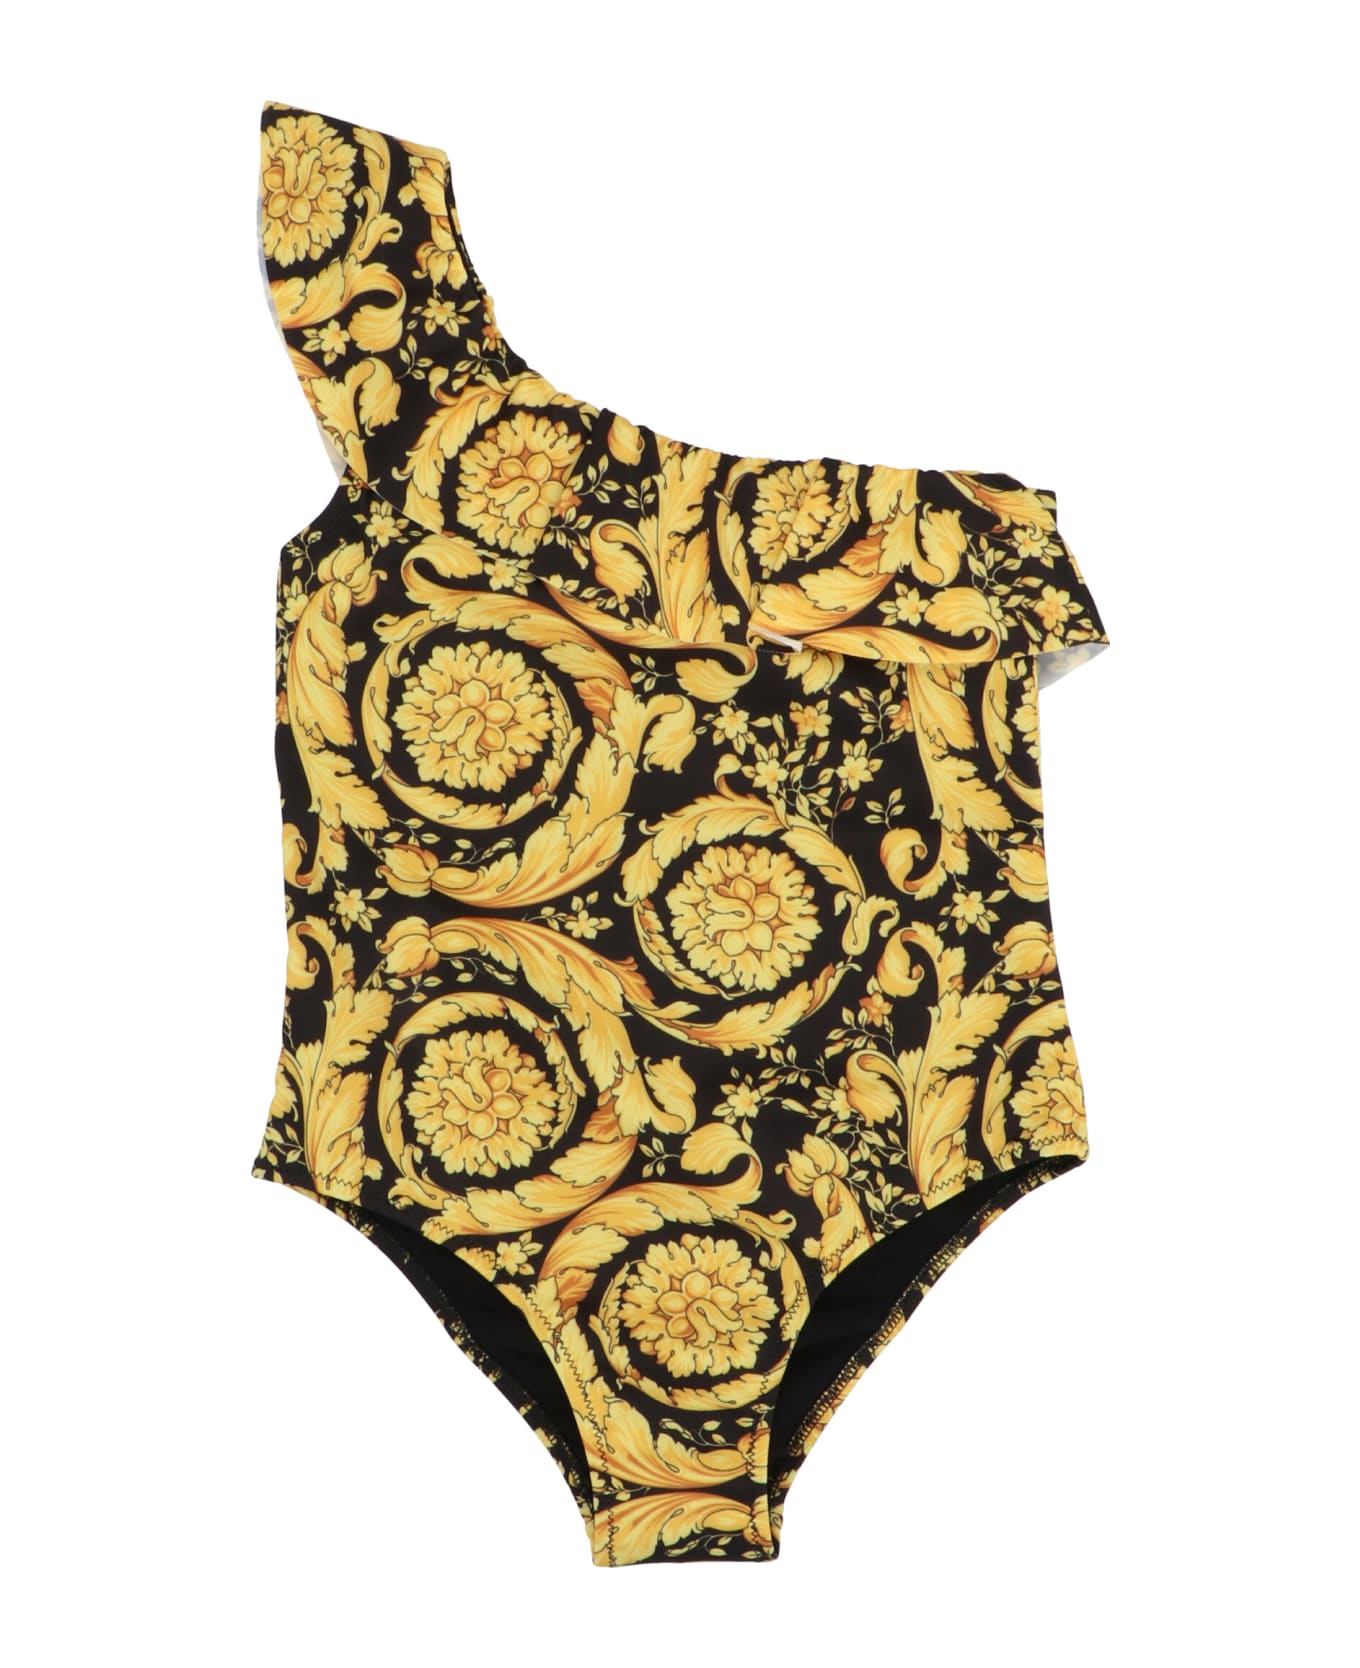 Versace 'baroque Ss92' One-piece Swimsuit - Black/gold